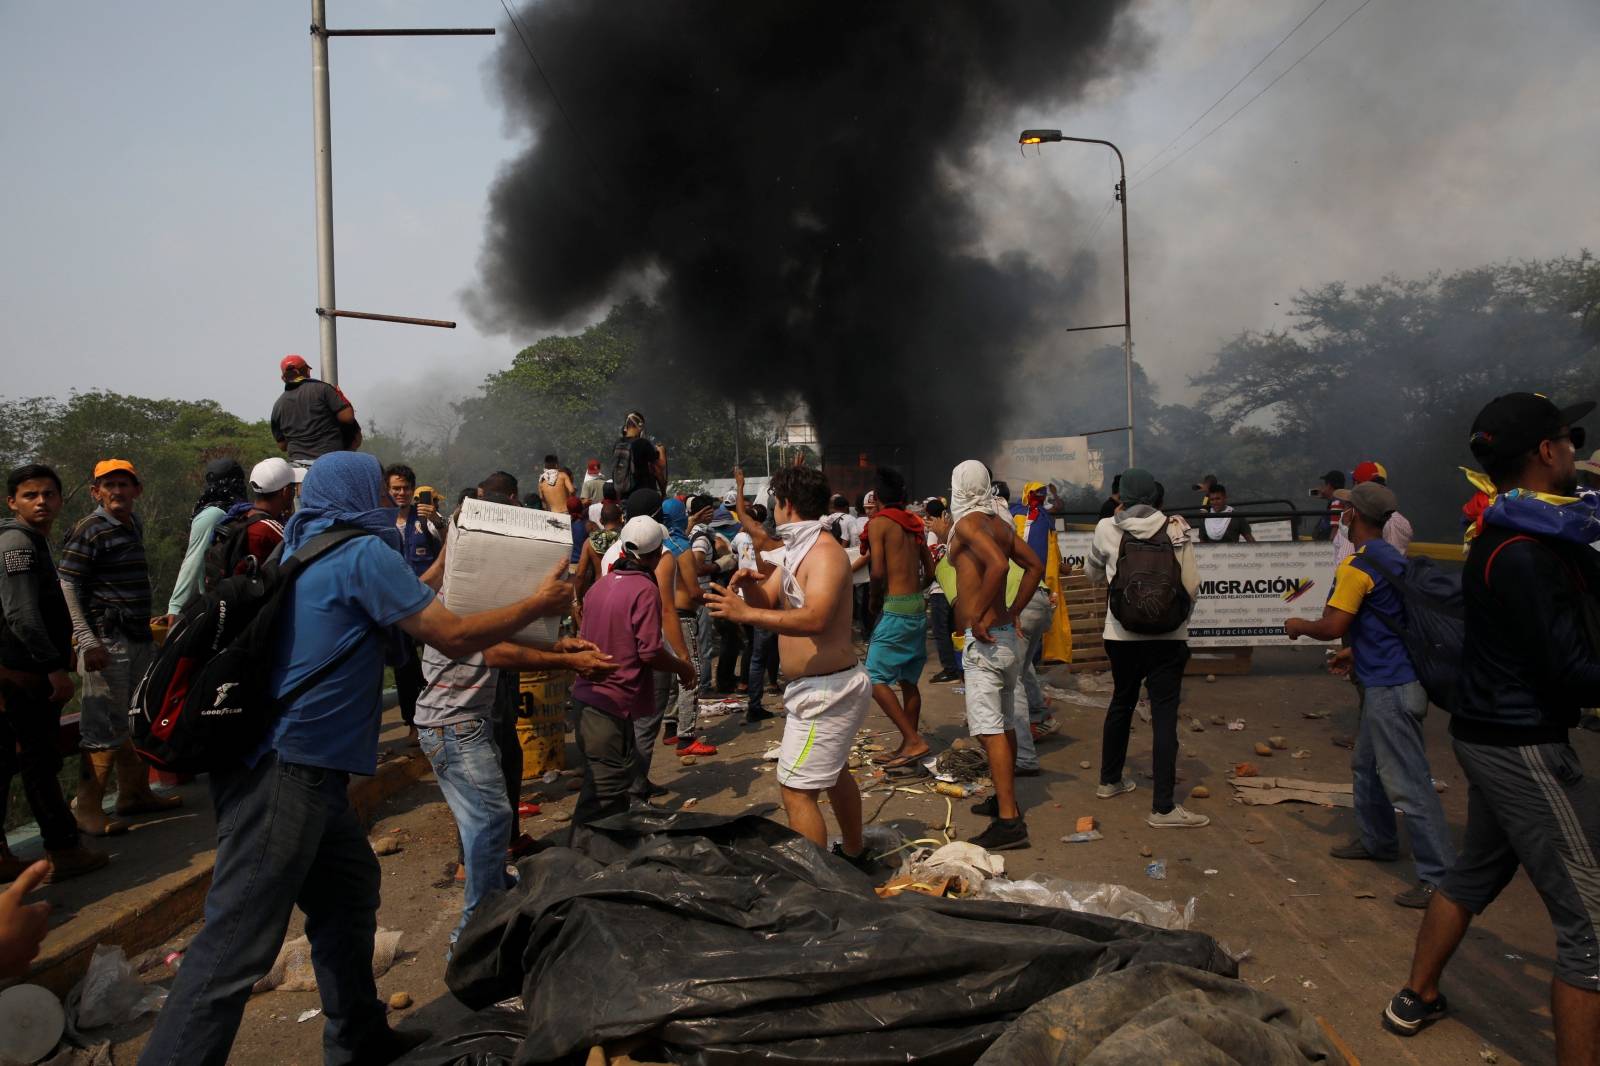 Opposition supporters unload humanitarian aid from a truck that was sent on fire in Cucuta